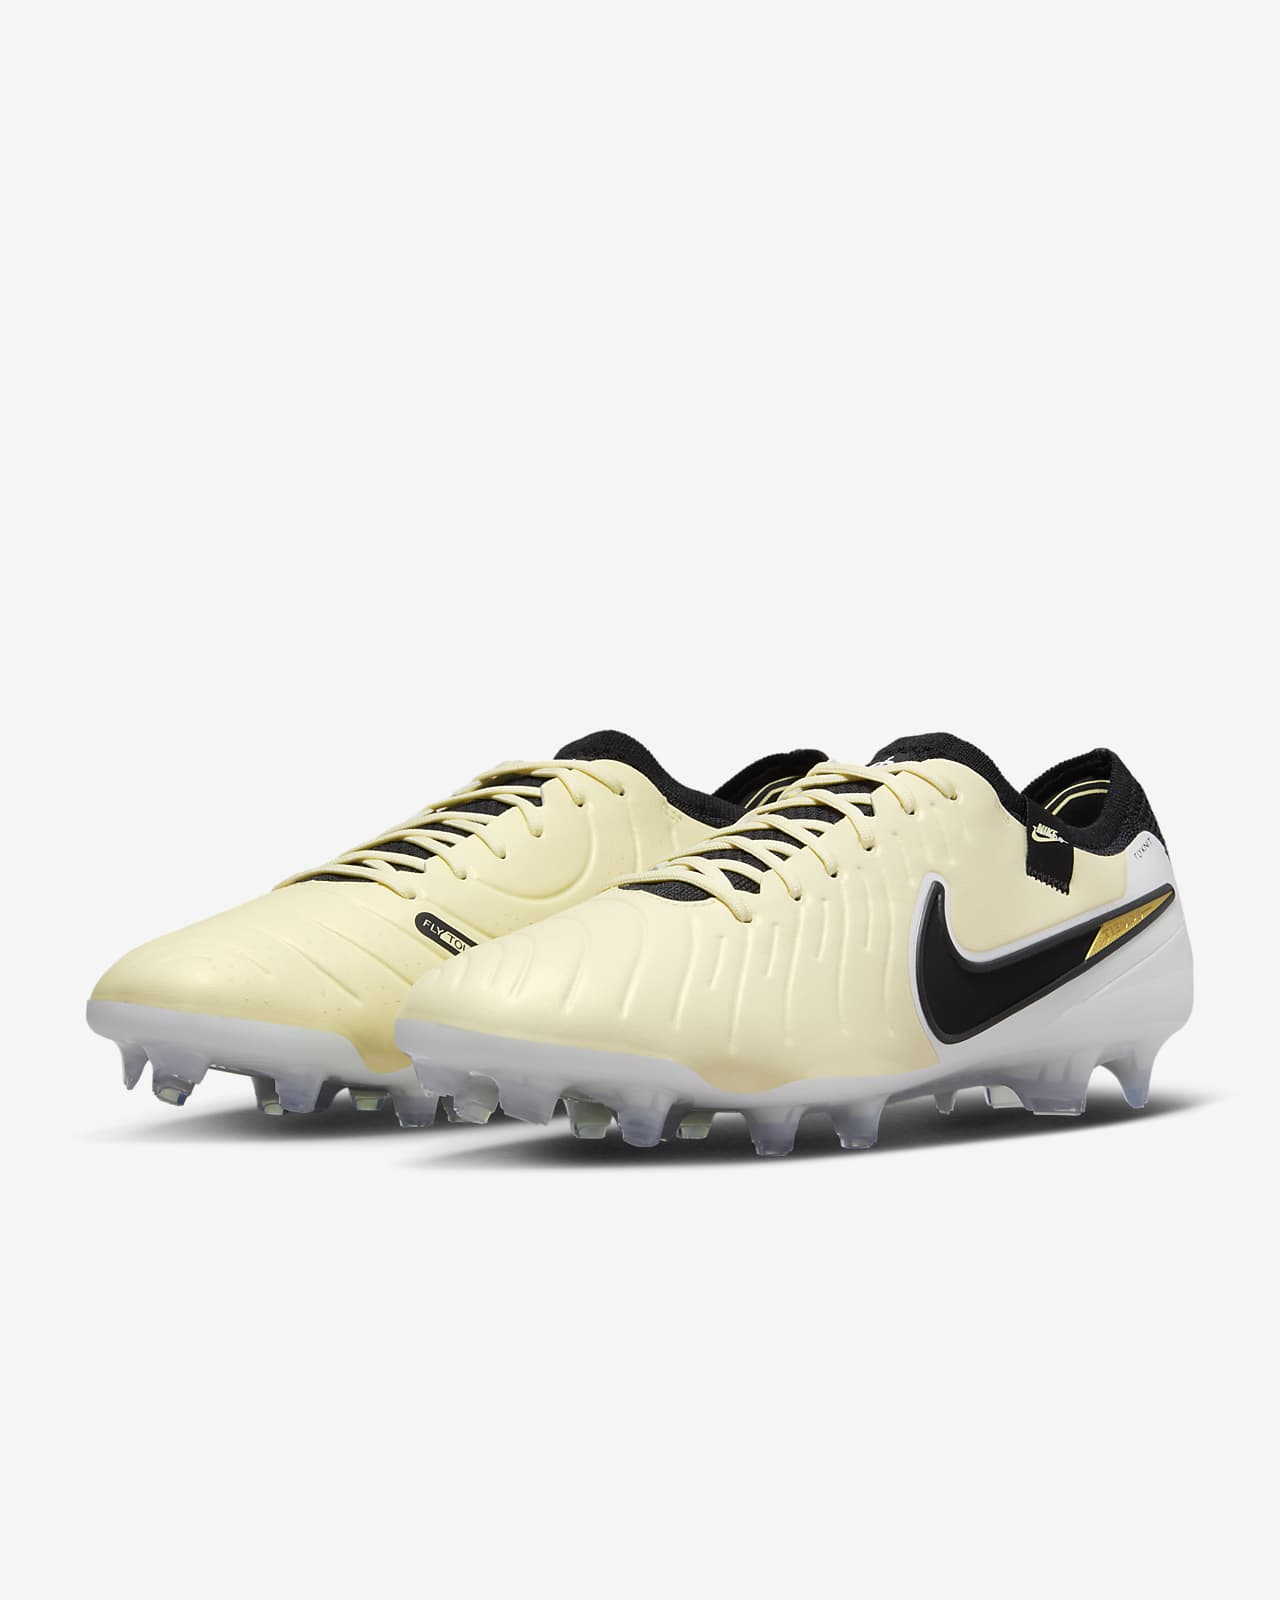 Nike Tiempo Legend 10 Elite Firm-Ground Low-Top Soccer Cleats